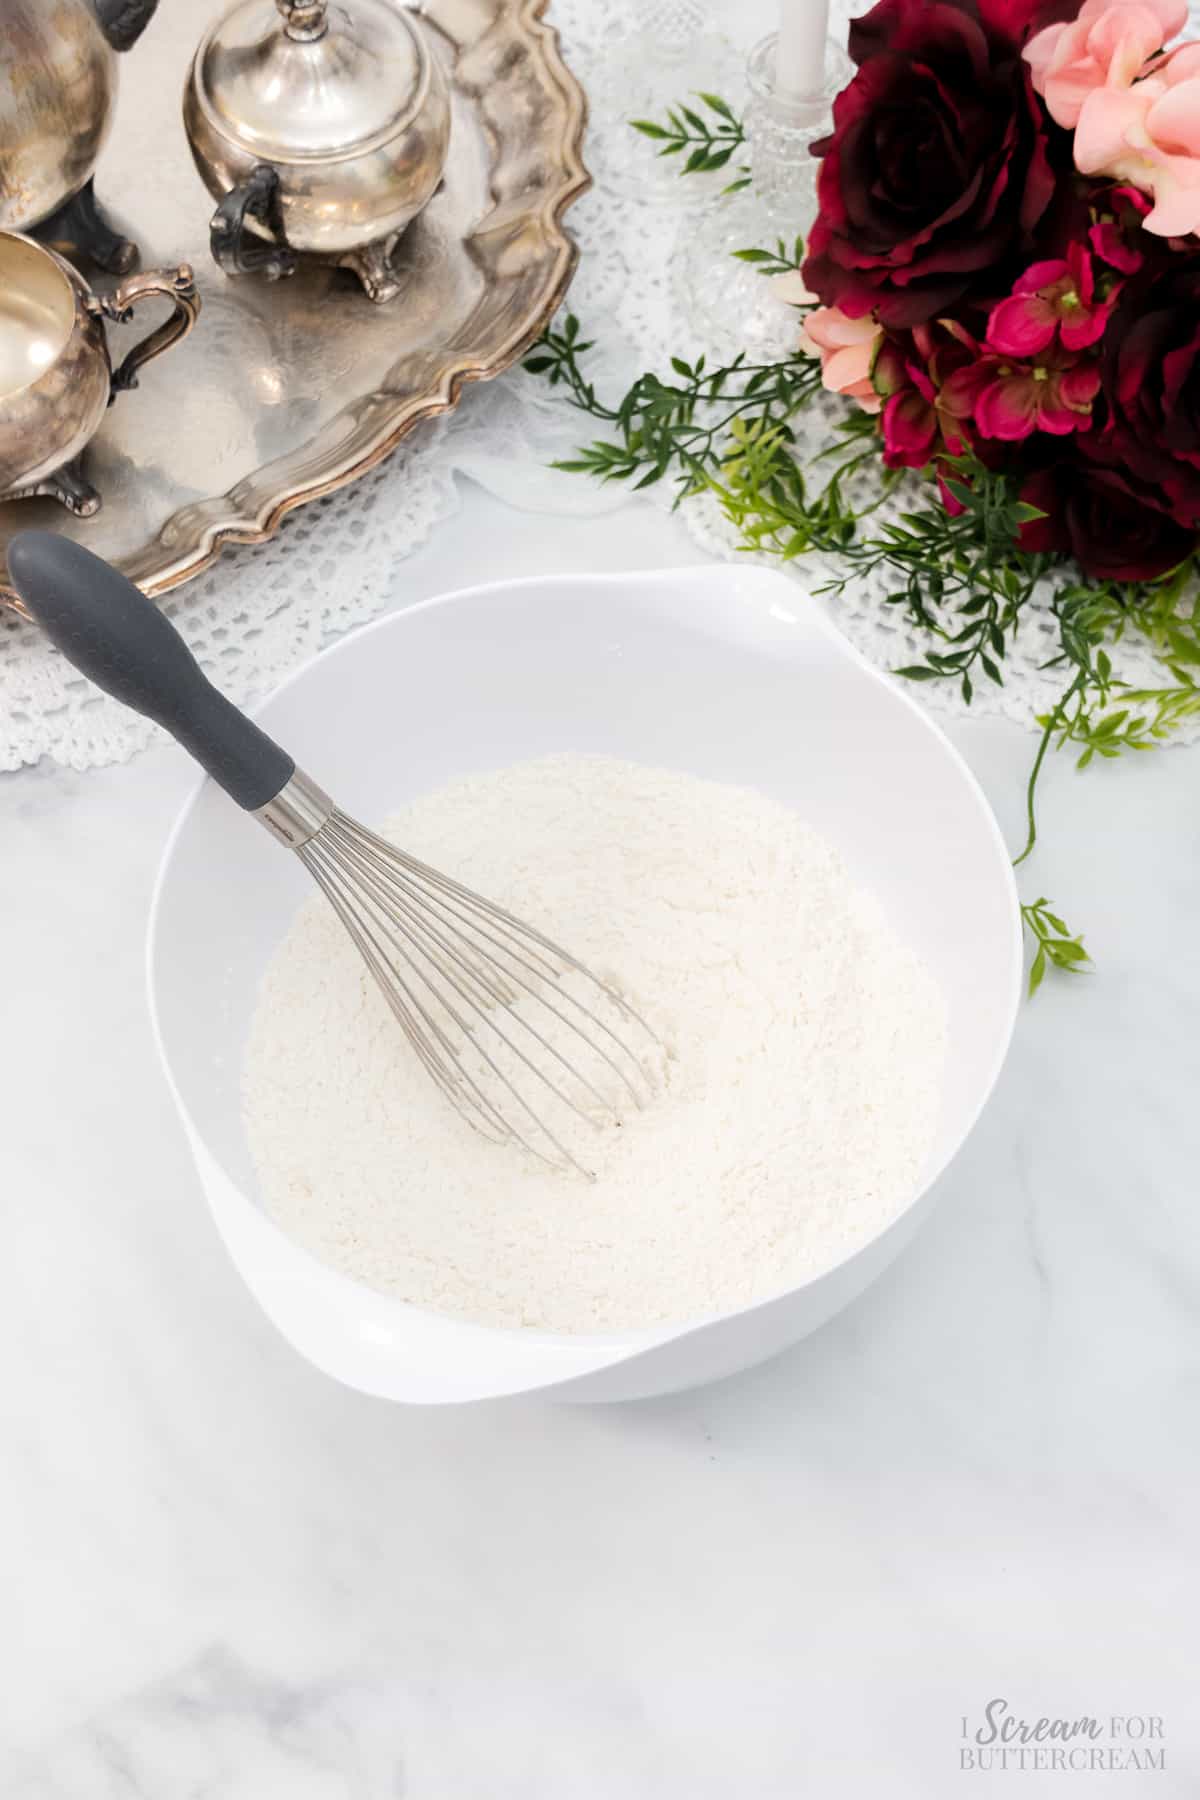 Flour mixture in a white mixing bowl with a whisk.